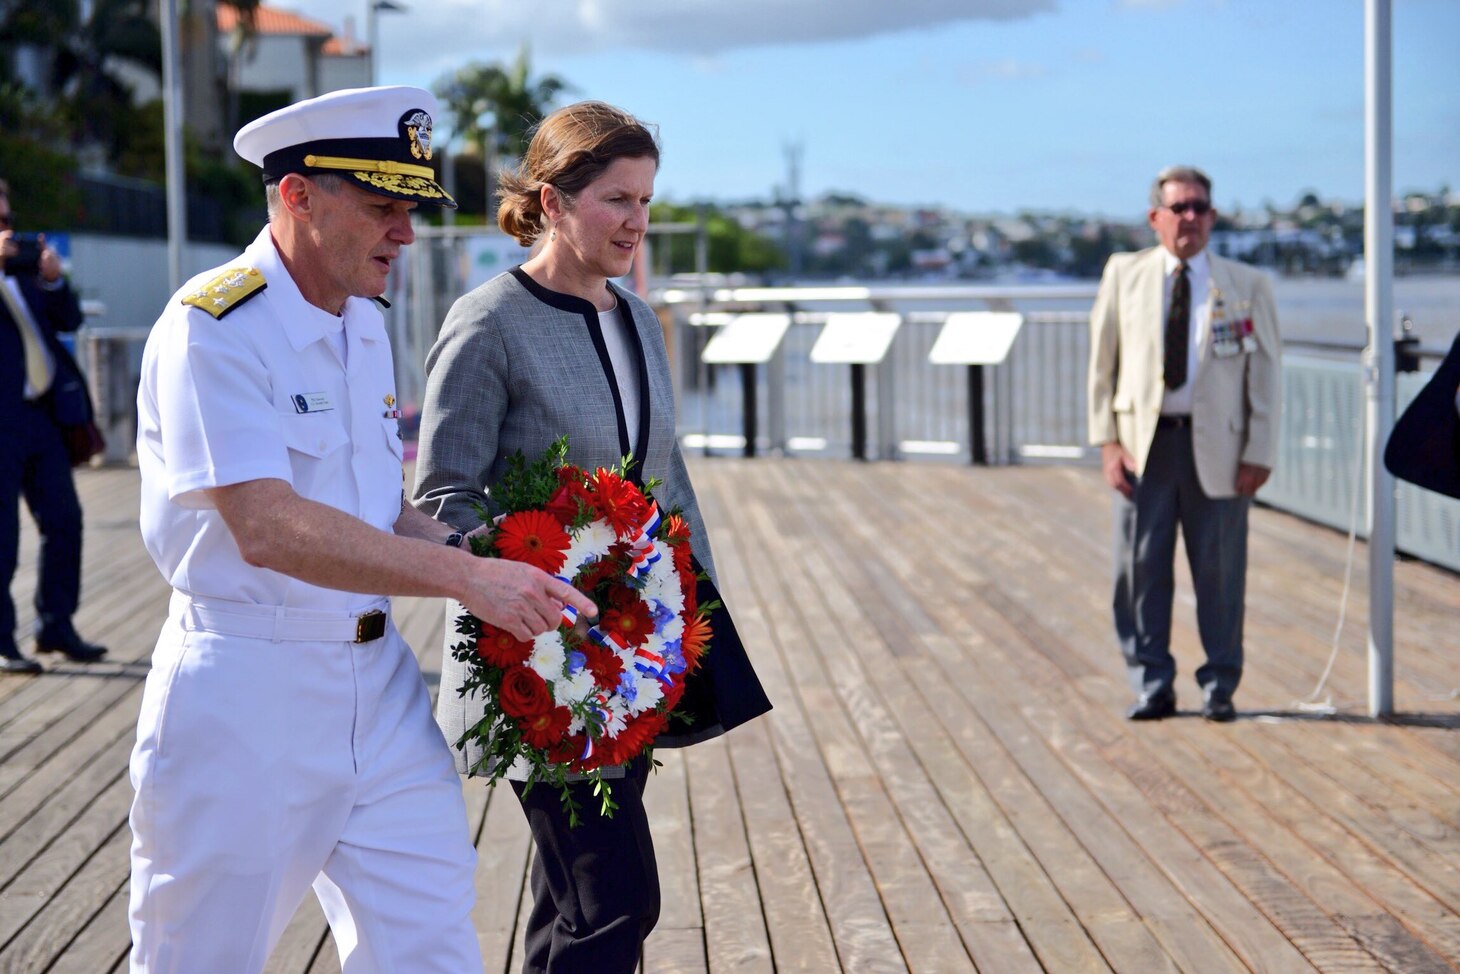 BRISBANE, Australia (March 14, 2018) Vice Adm. Phil Sawyer, commander of U.S. 7th Fleet, and U.S. Consul General Valerie Fowler prepare to lay a wreath at the Submariners Walk Heritage Trail, where the U.S. Navy's Task Force 42/72 was located during World War II. Sawyer is visiting Brisbane in conjunction with the 75th anniversary of 7th Fleet's establishment here on March 15, 1943. (U.S Consulate General Sydney photo)